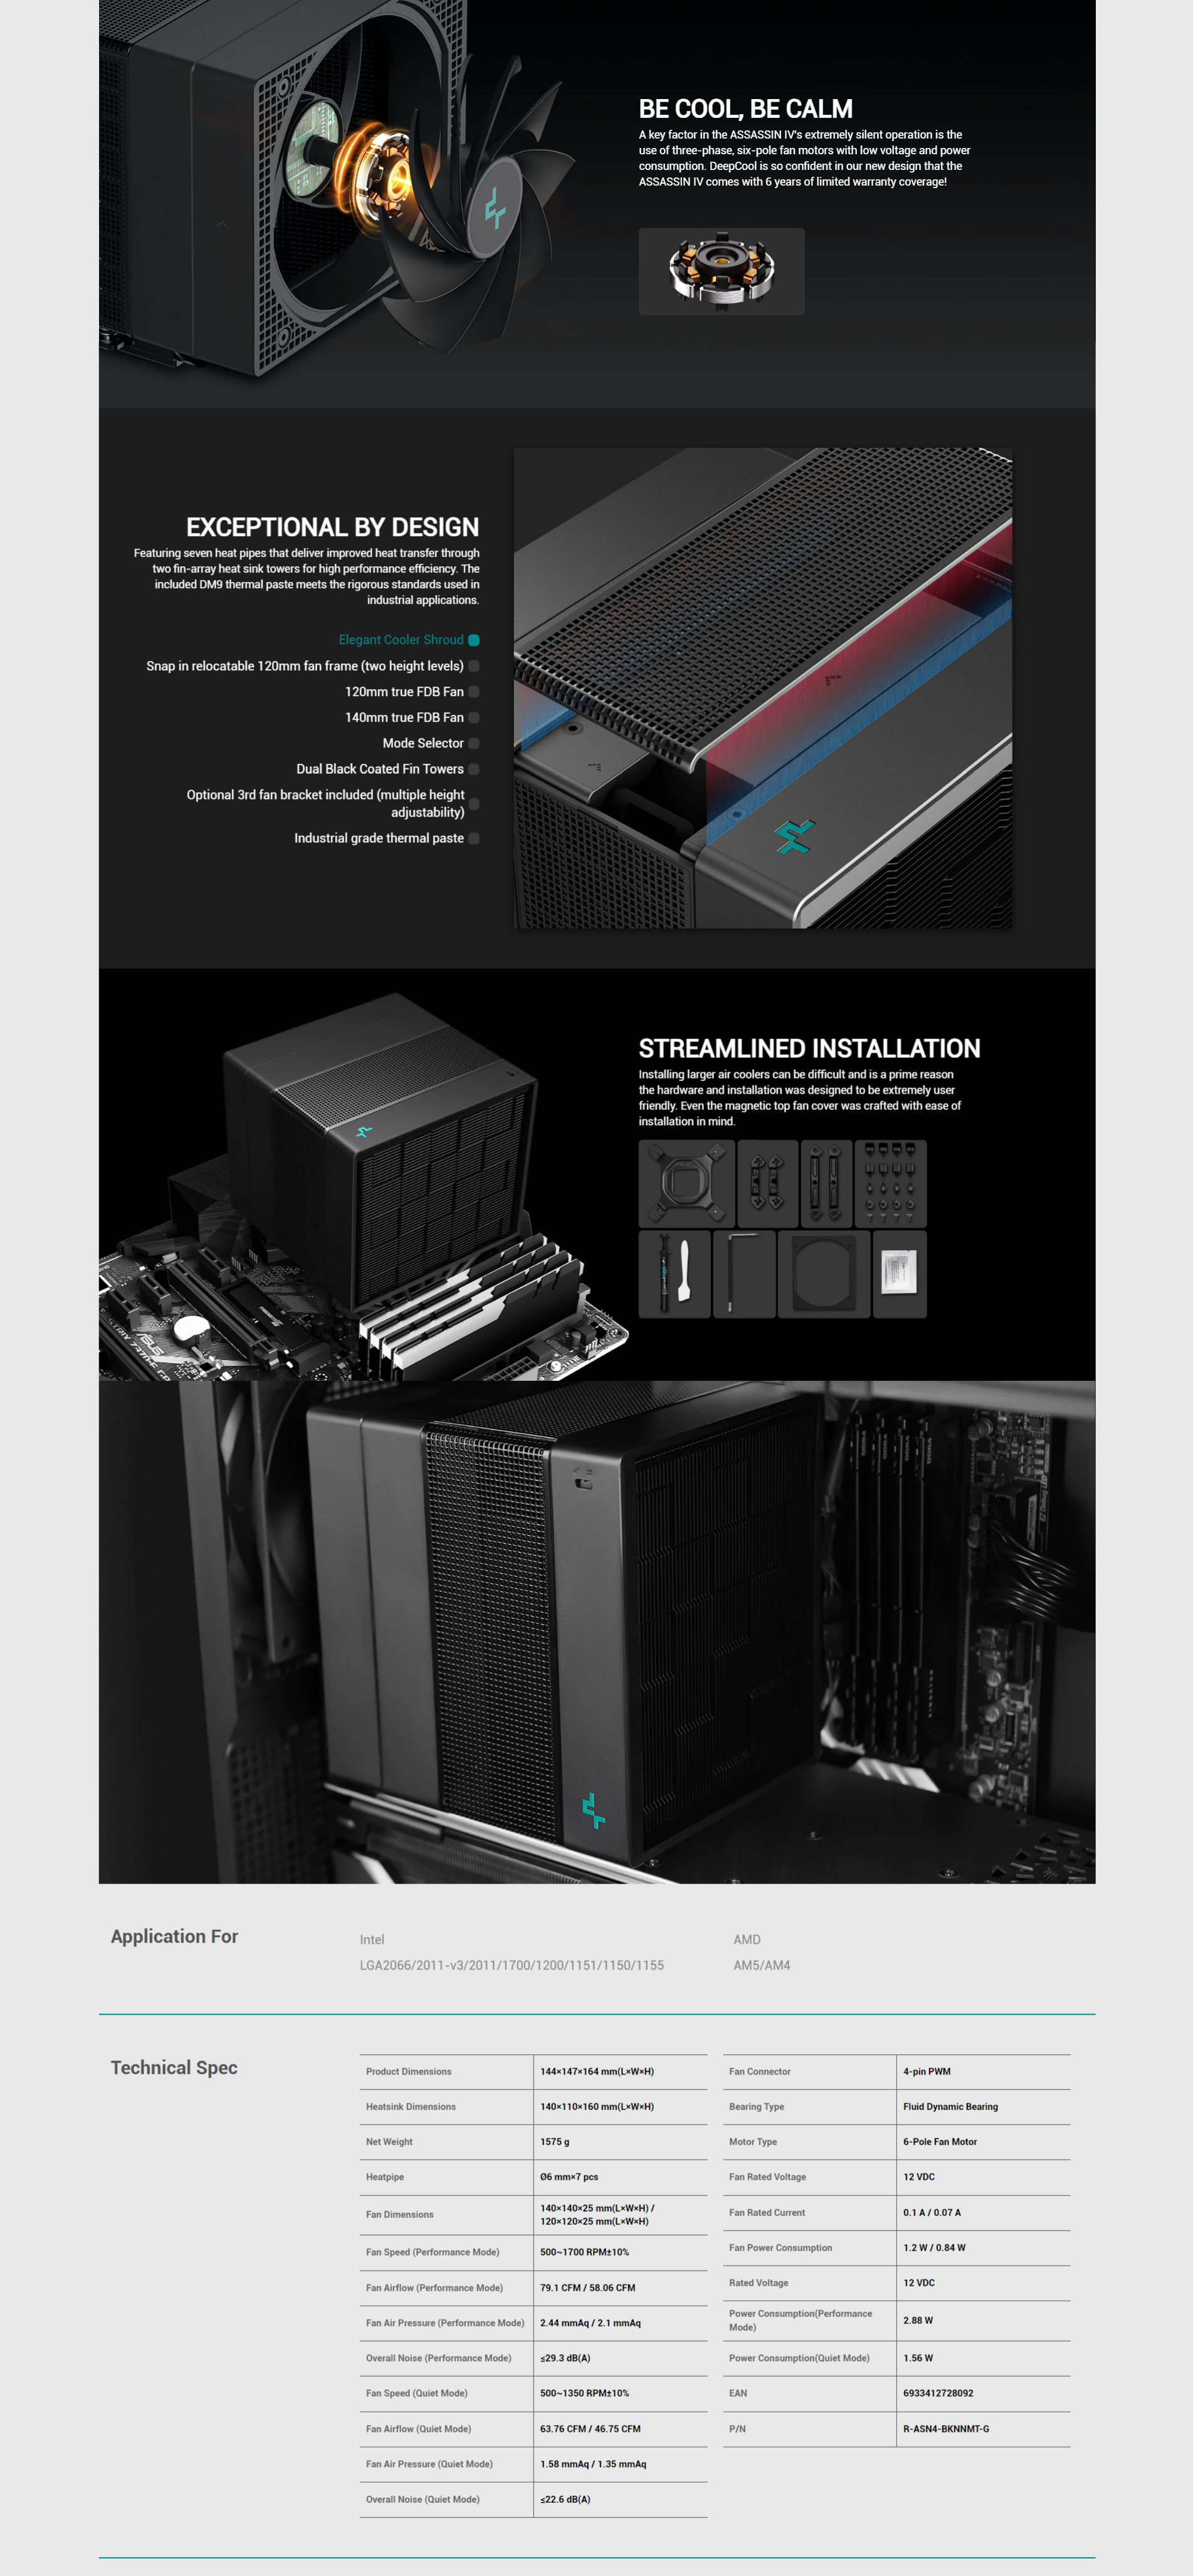 A large marketing image providing additional information about the product DeepCool Assassin IV CPU Cooler - Additional alt info not provided